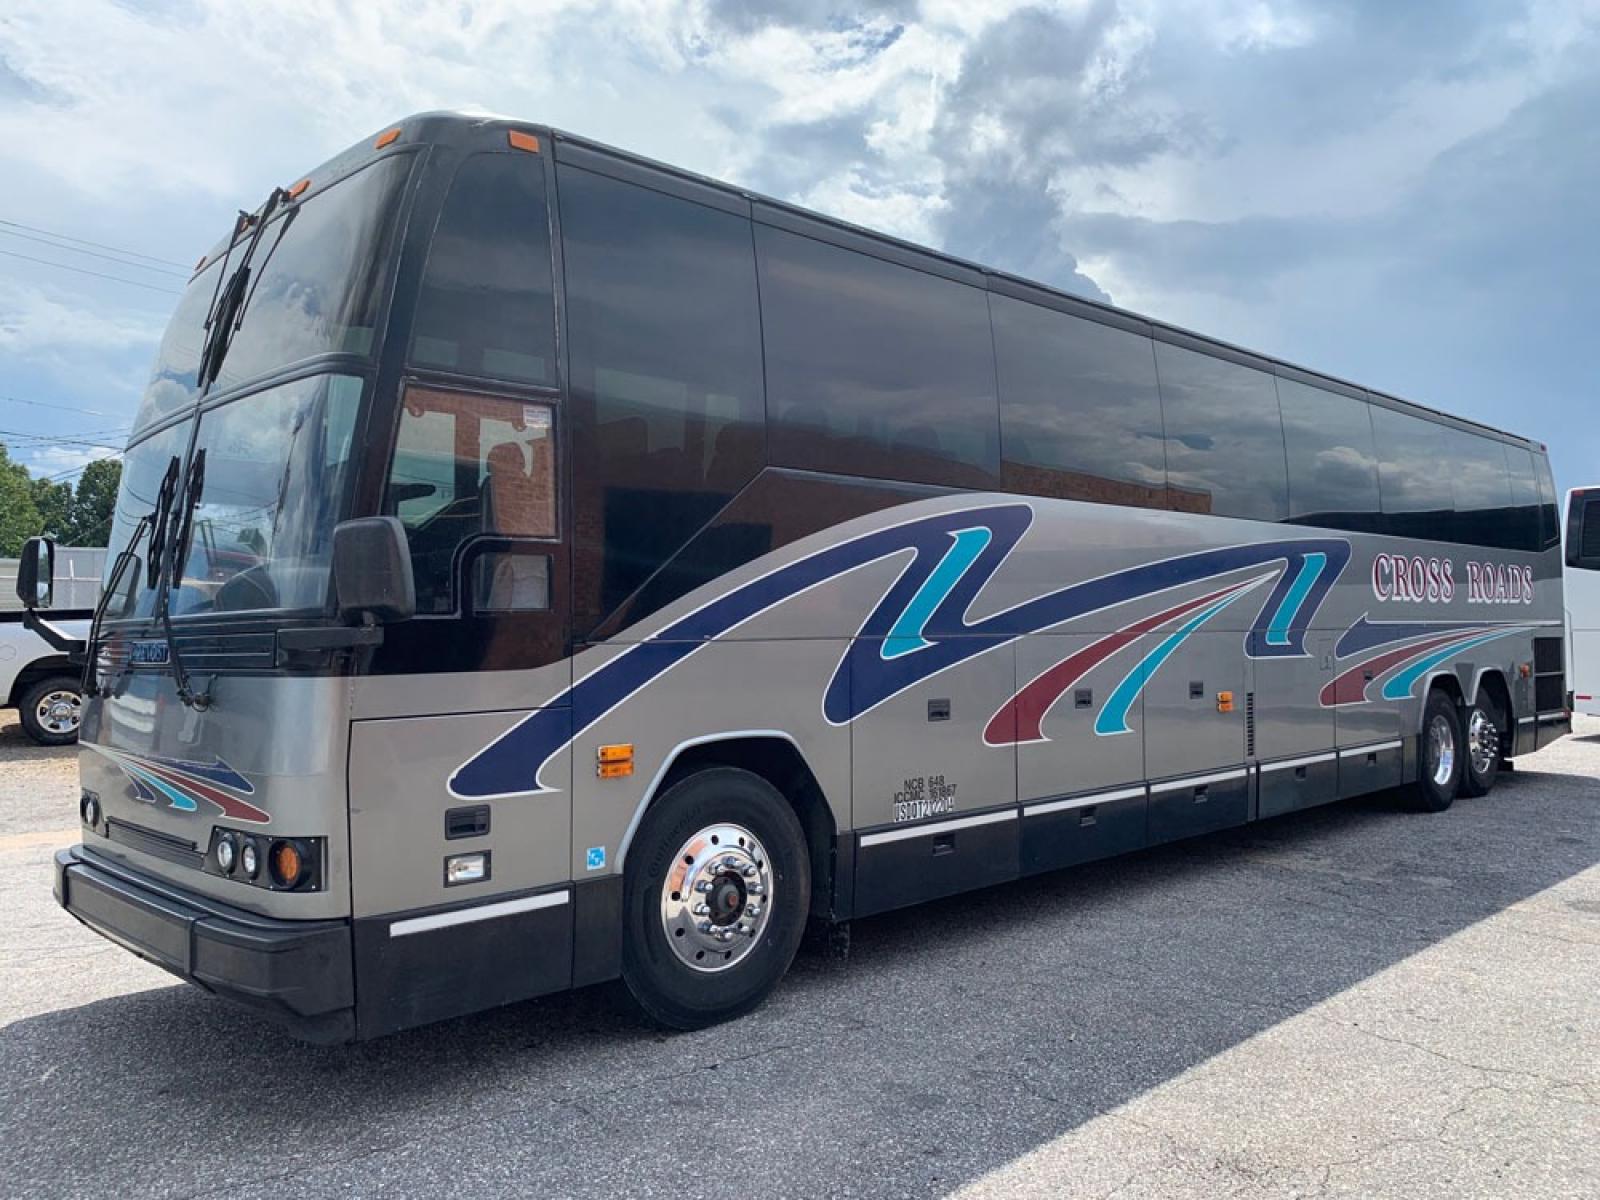 1998 Prevost HS-45 with an Detroit Diesel Series 60 engine, Allison transmission, 0.000000, 0.000000 - 1998 Prevost H3-45 - Series 60 Detroit Diesel - Allison Automatic Transmission - 45' - 56 Passengers -Enclosed Parcel Racks - 5 Flat Screens and DVD - Photo #5